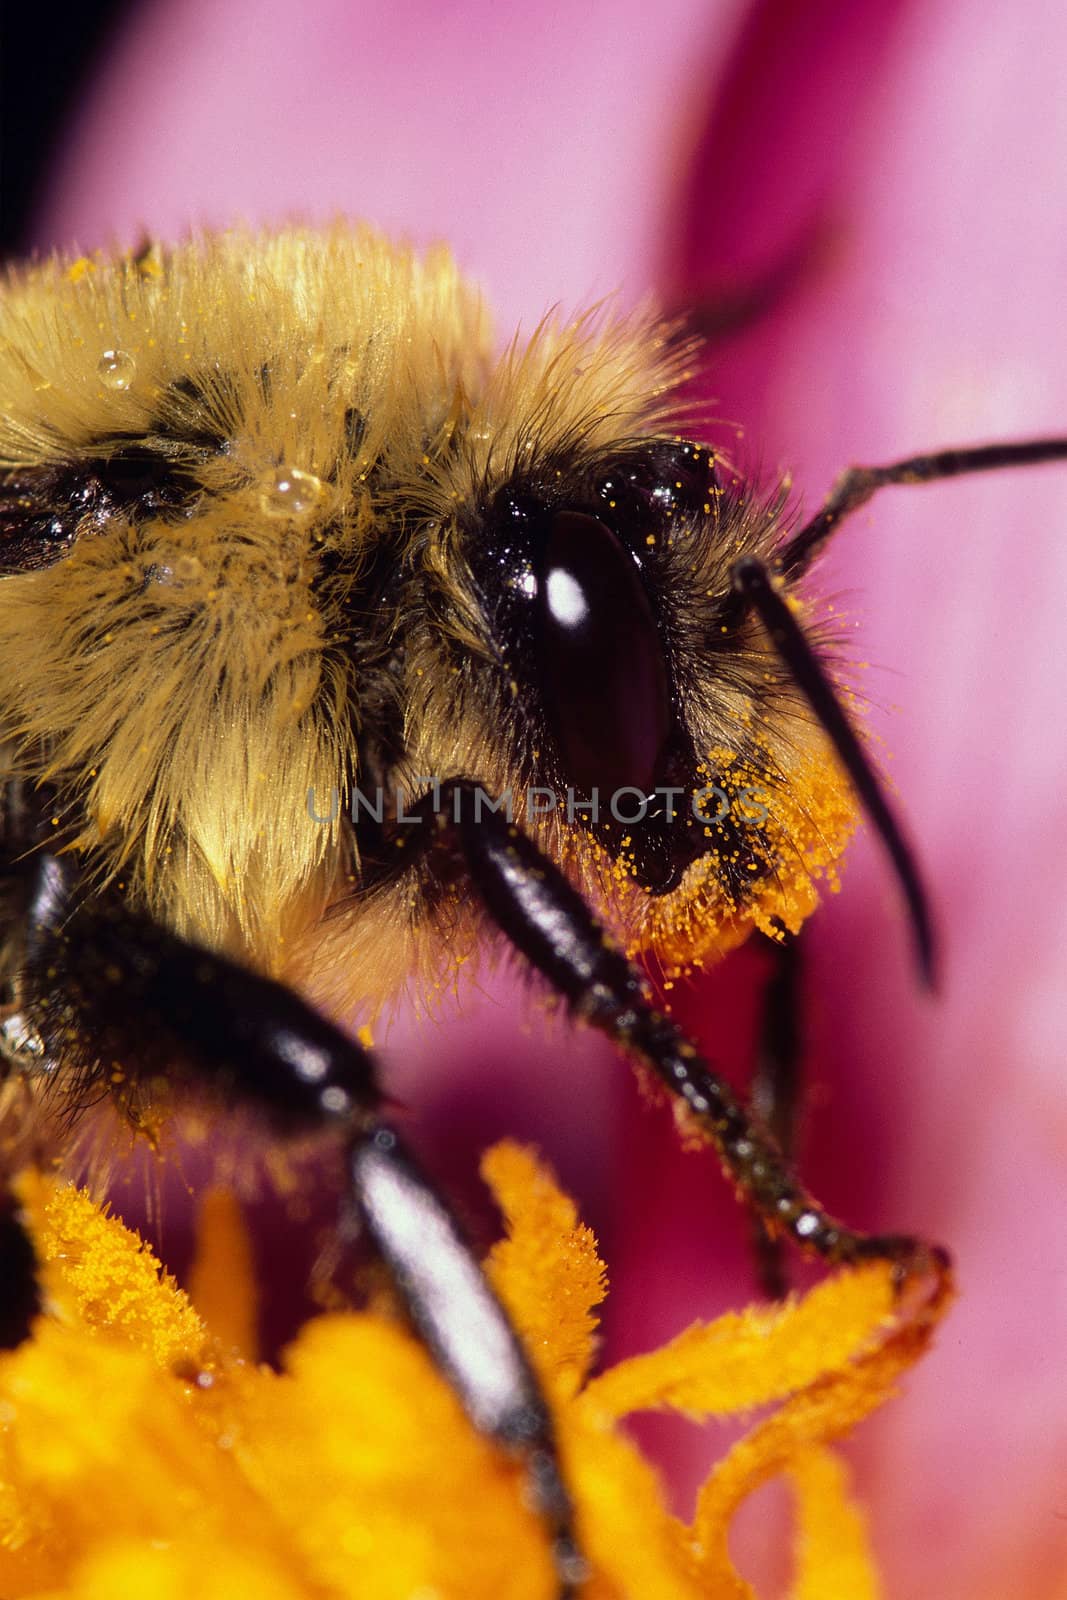 Extreme close-up of an American Bumblebee